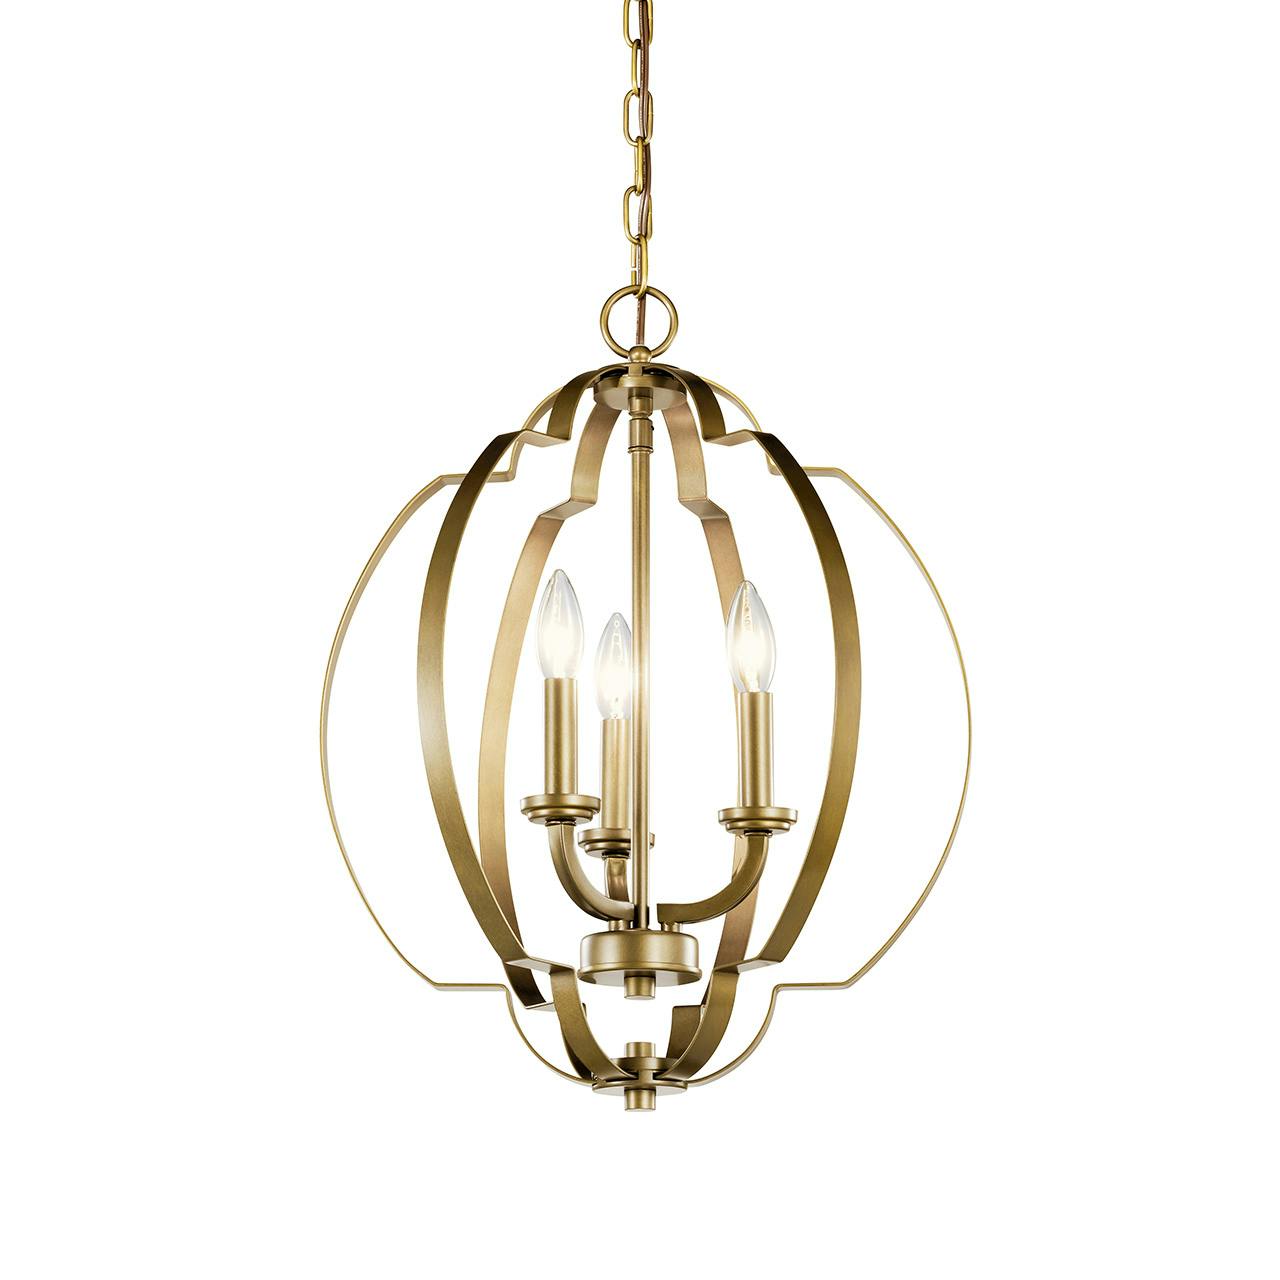 Voleta 20.75" 3 Light Pendant Brass without the canopy on a white background